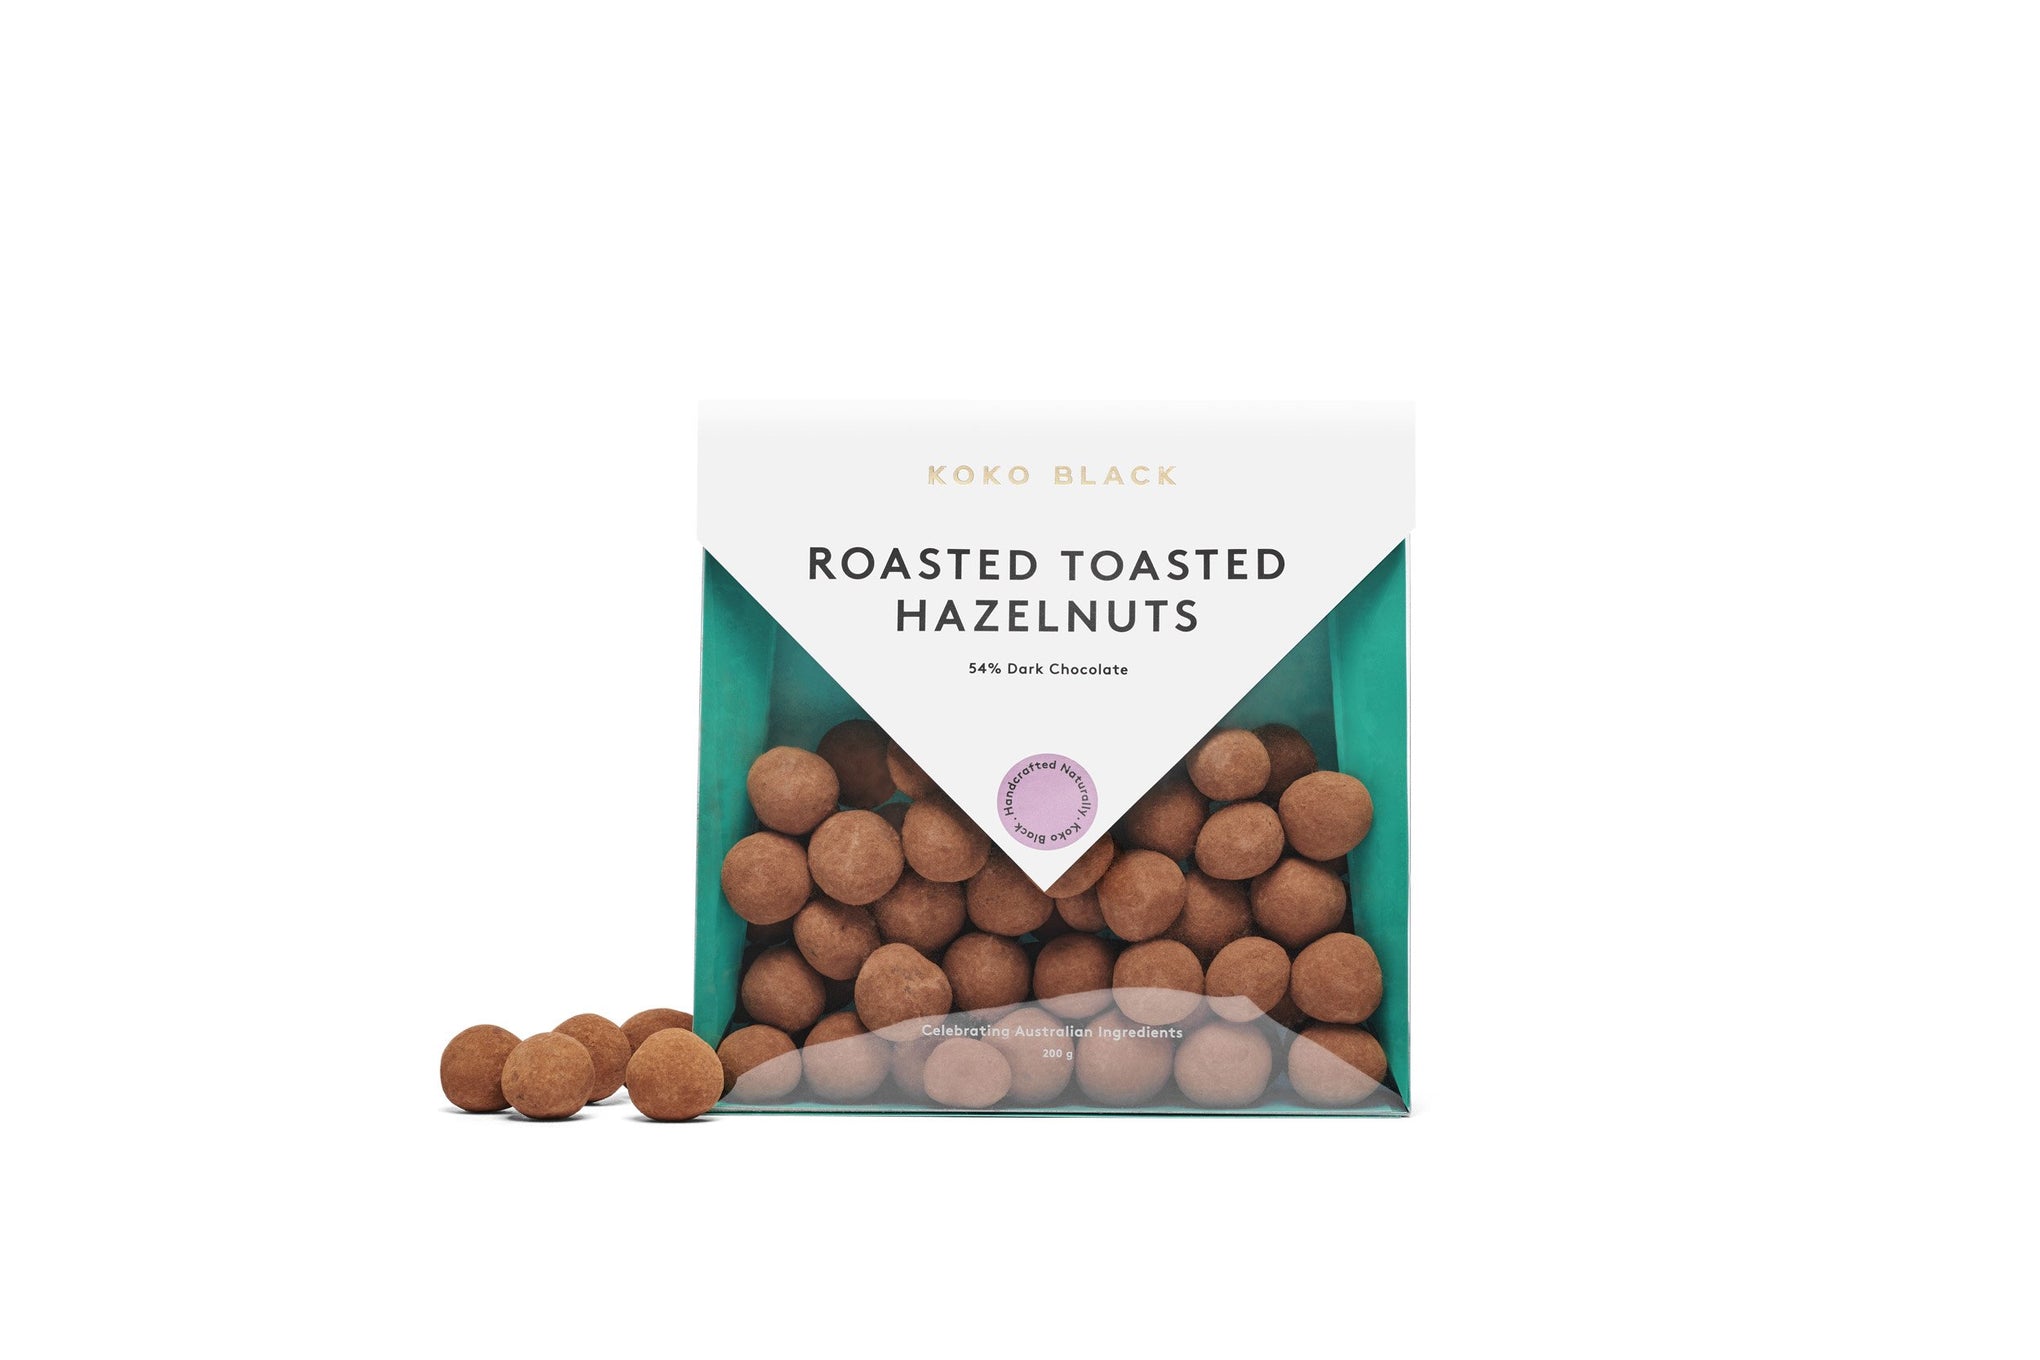 Dusted chocolate hazelnuts beside packaging